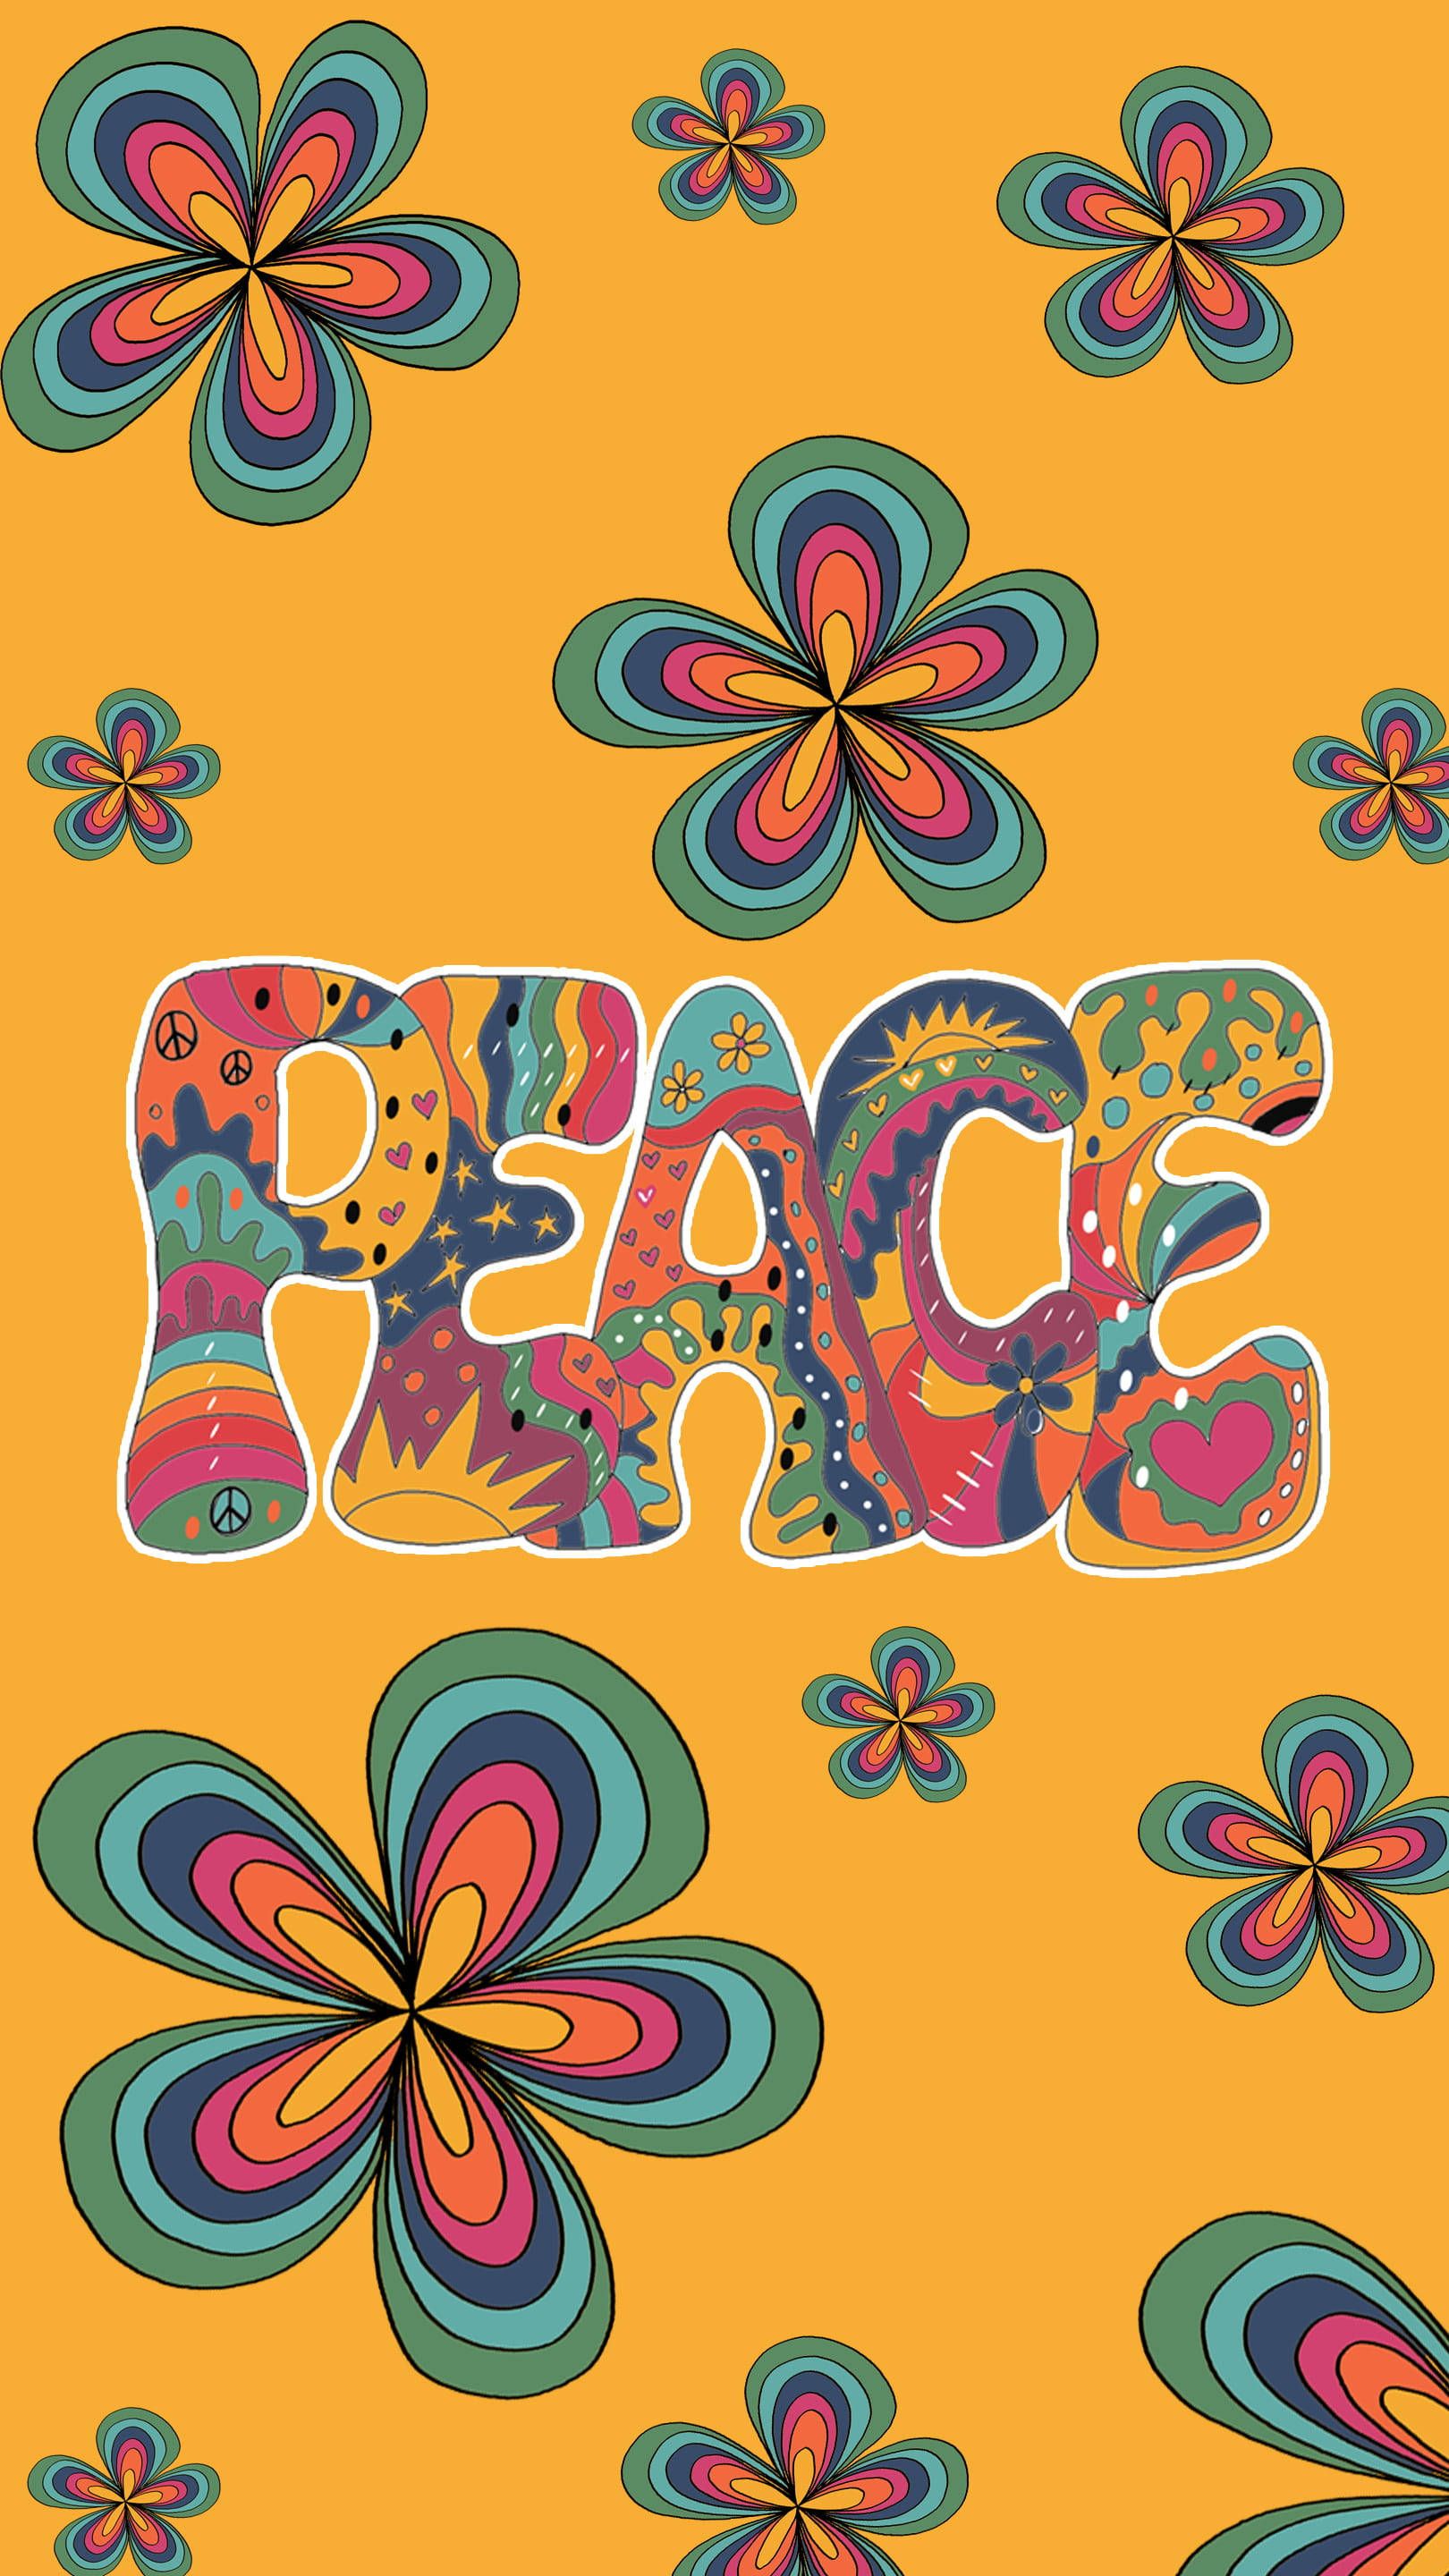 An orange background with the word peace written in the center. - Peace